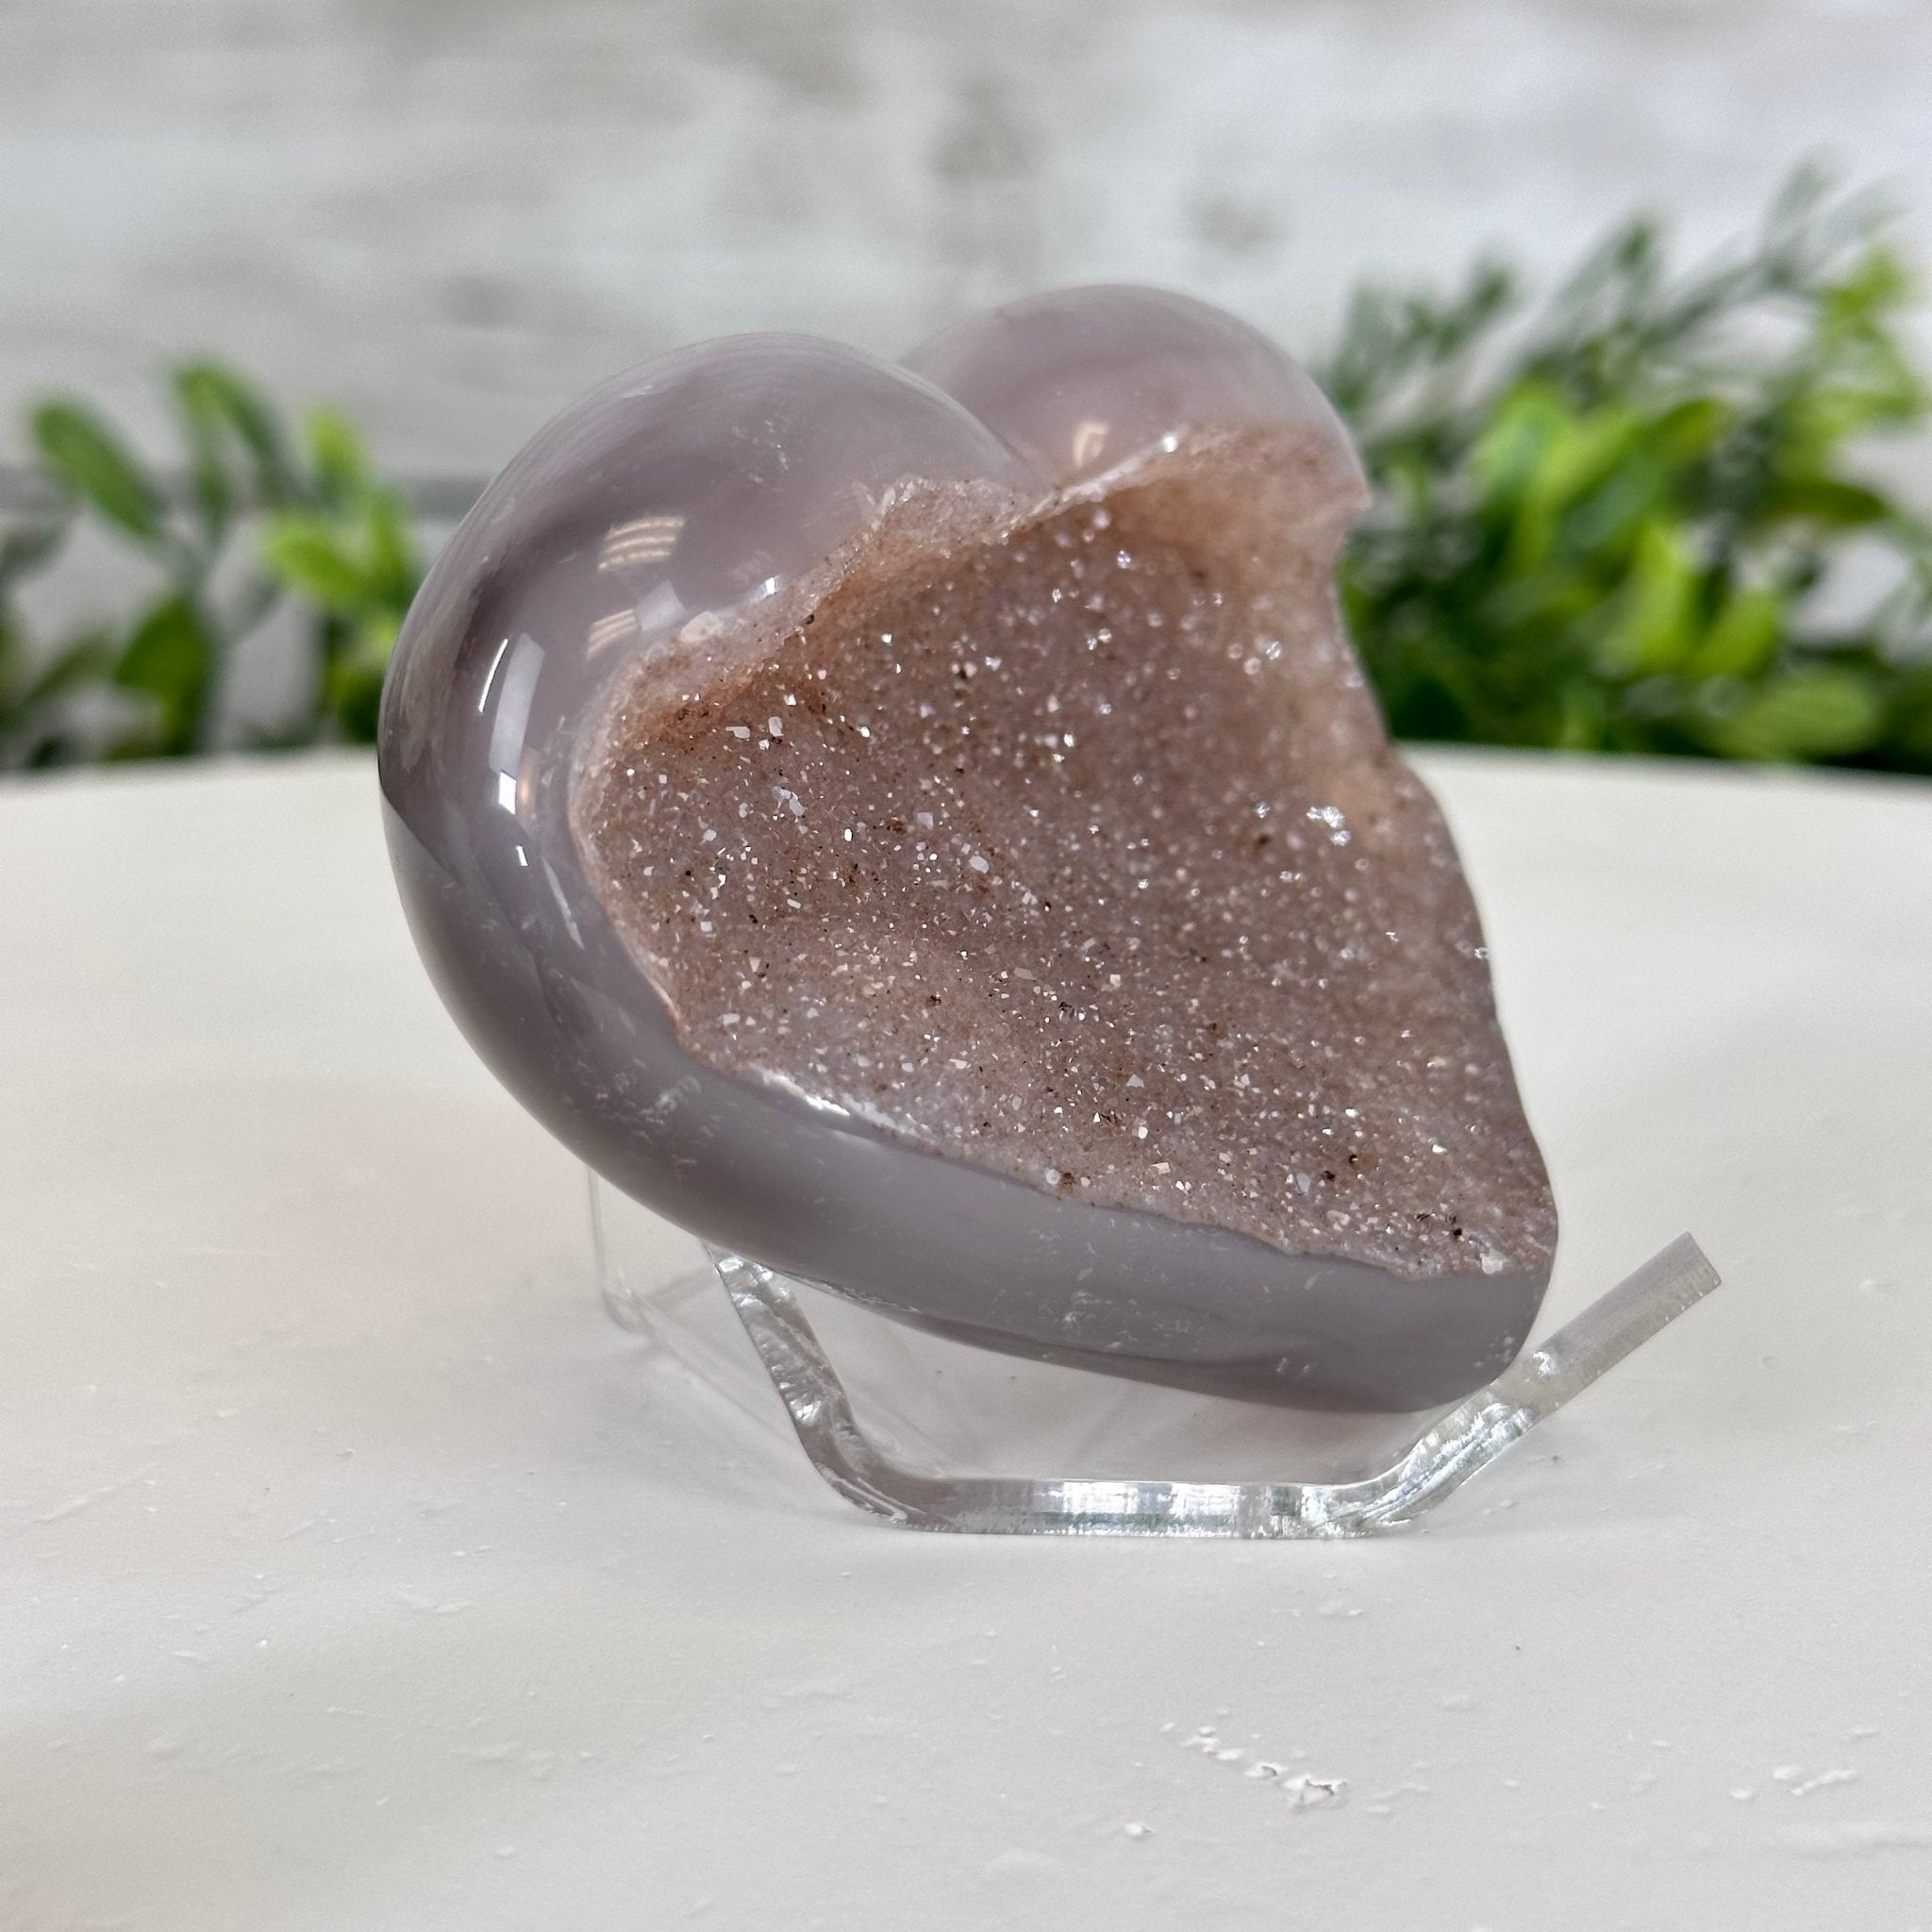 Extra Quality Amethyst Heart Geode on an Acrylic Stand, 0.37 lbs & 2.3" Tall #5462-0030 by Brazil Gems - Brazil GemsBrazil GemsExtra Quality Amethyst Heart Geode on an Acrylic Stand, 0.37 lbs & 2.3" Tall #5462-0030 by Brazil GemsHearts5462-0030